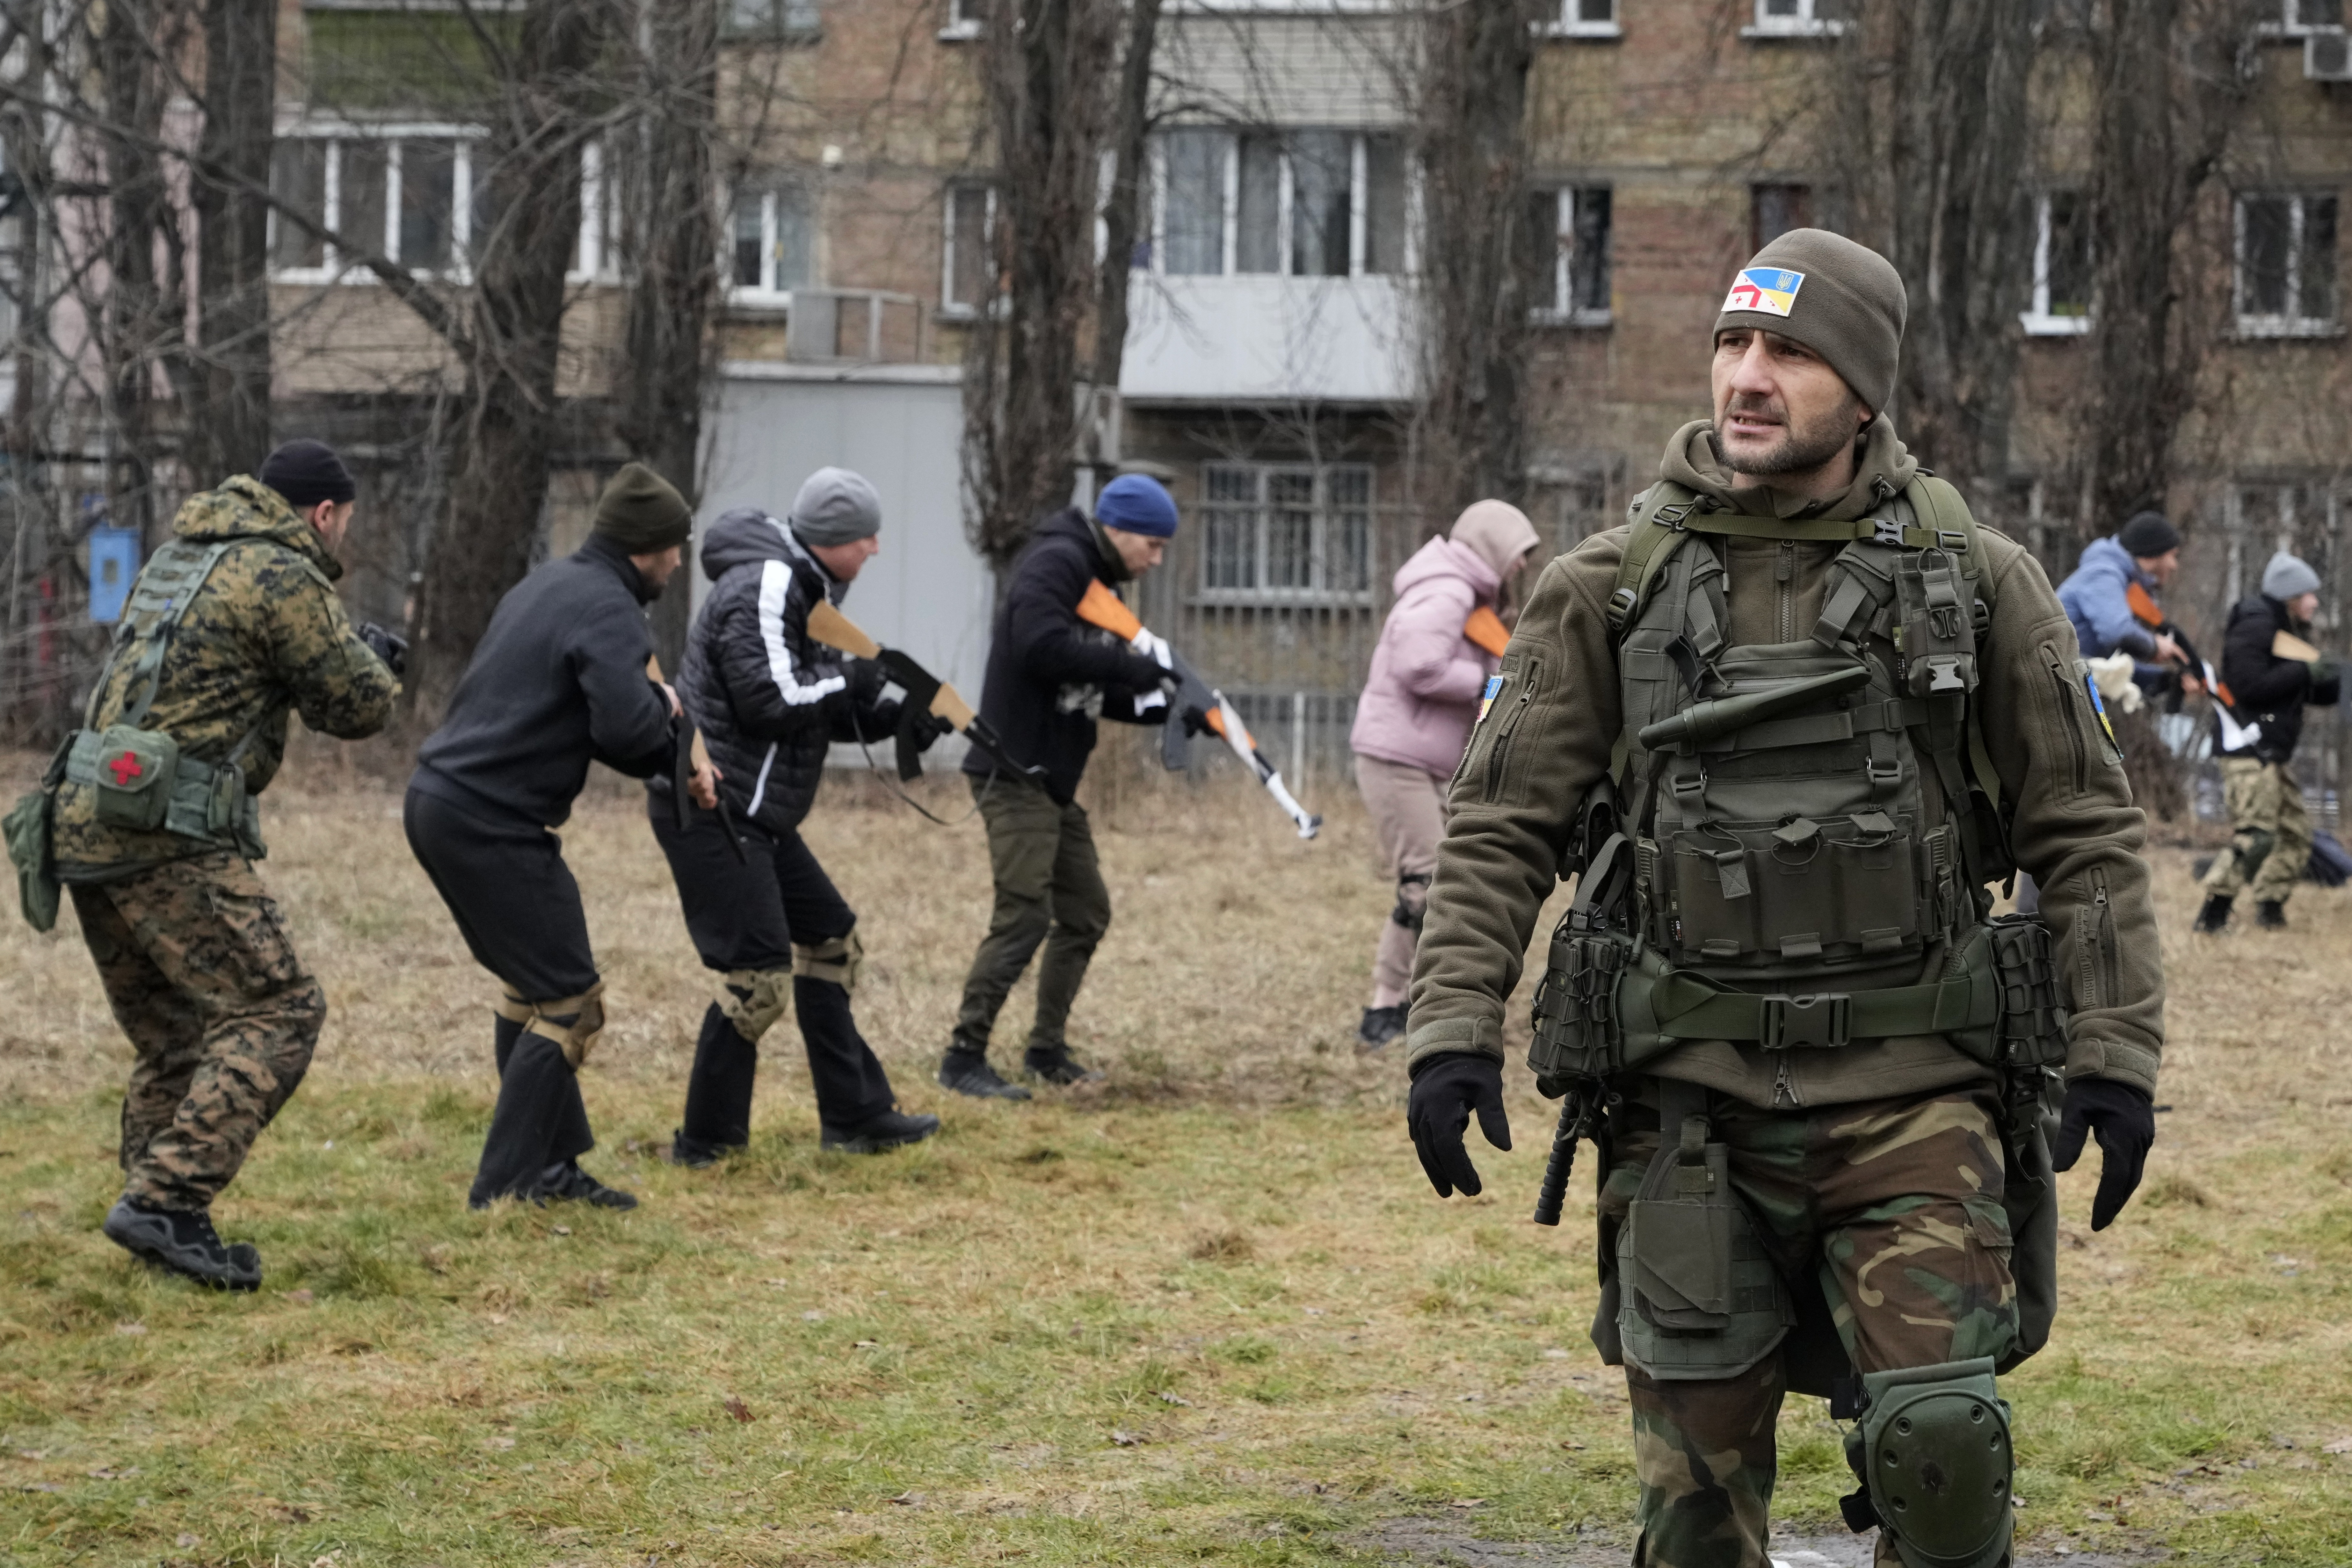 An instructor watches as civilians train with members of the Georgian Legion, a paramilitary unit formed mainly by ethnic Georgian volunteers to fight against the Russian aggression in Ukraine in 2014, in Kyiv, Ukraine, Saturday, Feb. 19, 2022.